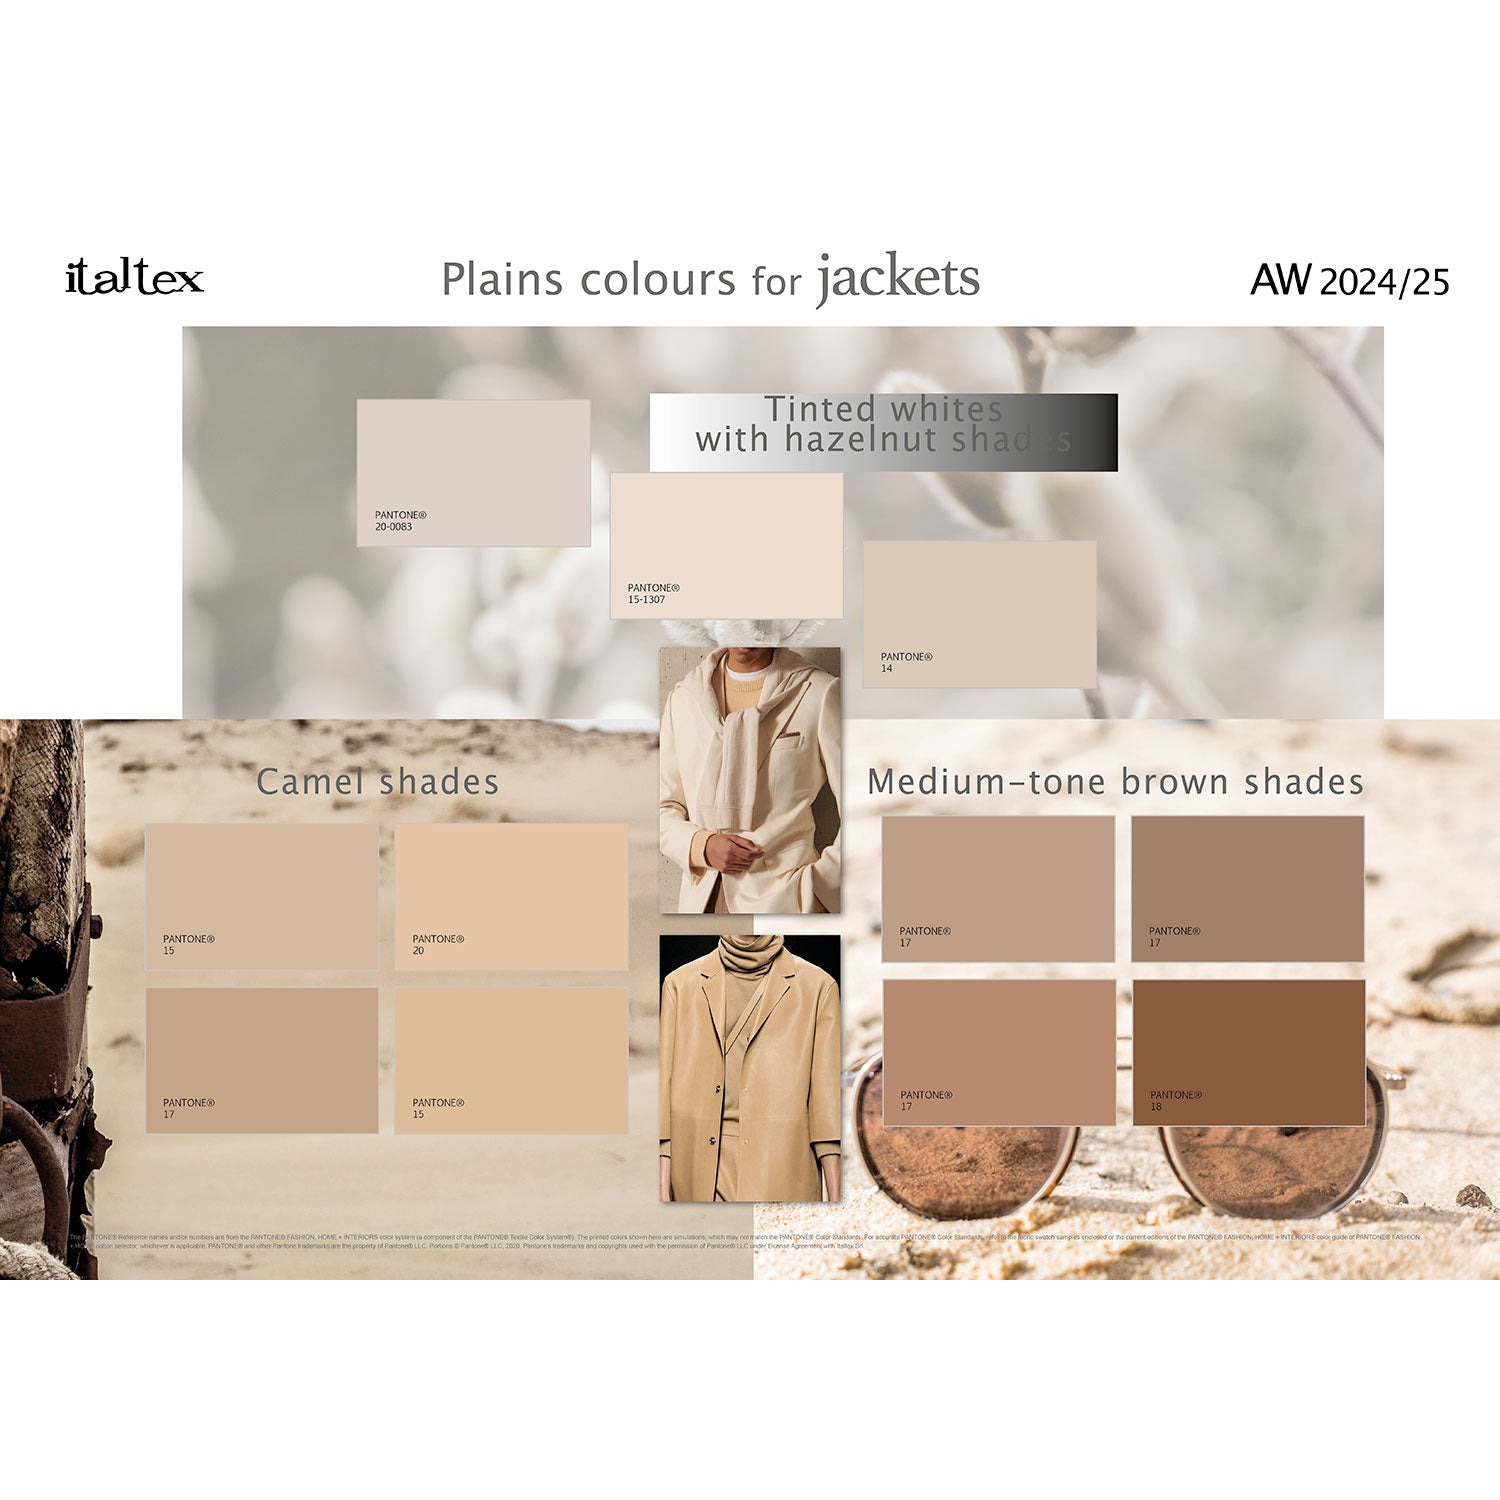 Eleven colors for jackets fall/winter 2024/25 in the light shades of browns including tinted whites with hazelnut shades, light camel tones and medium-tone brown shade, each with Pantone® codes